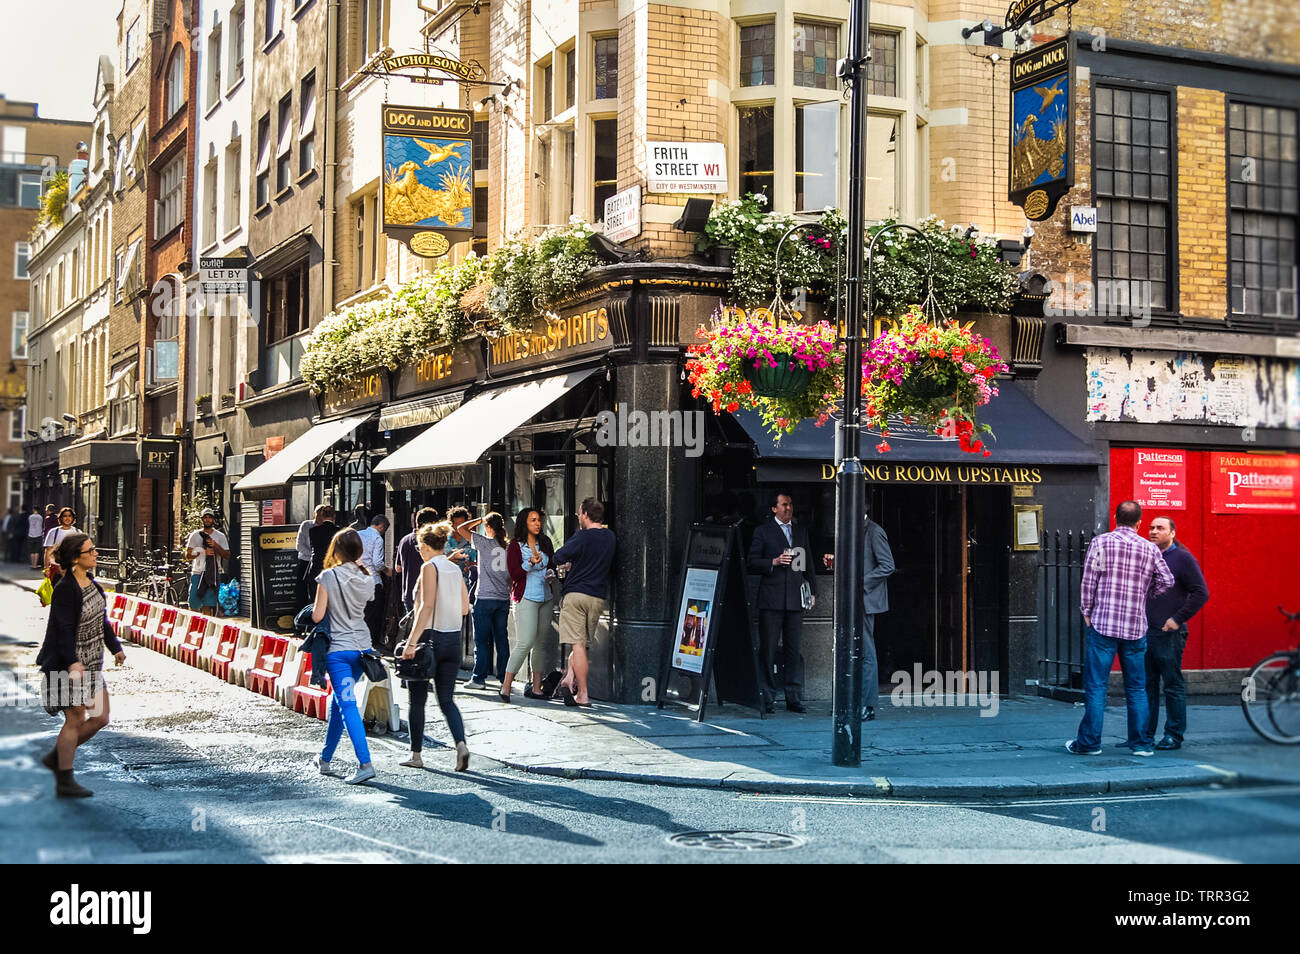 "The Dog and Duck", London, UK. Traditional London pub in Soho with one of the most famous and exquisite interiors. Stock Photo